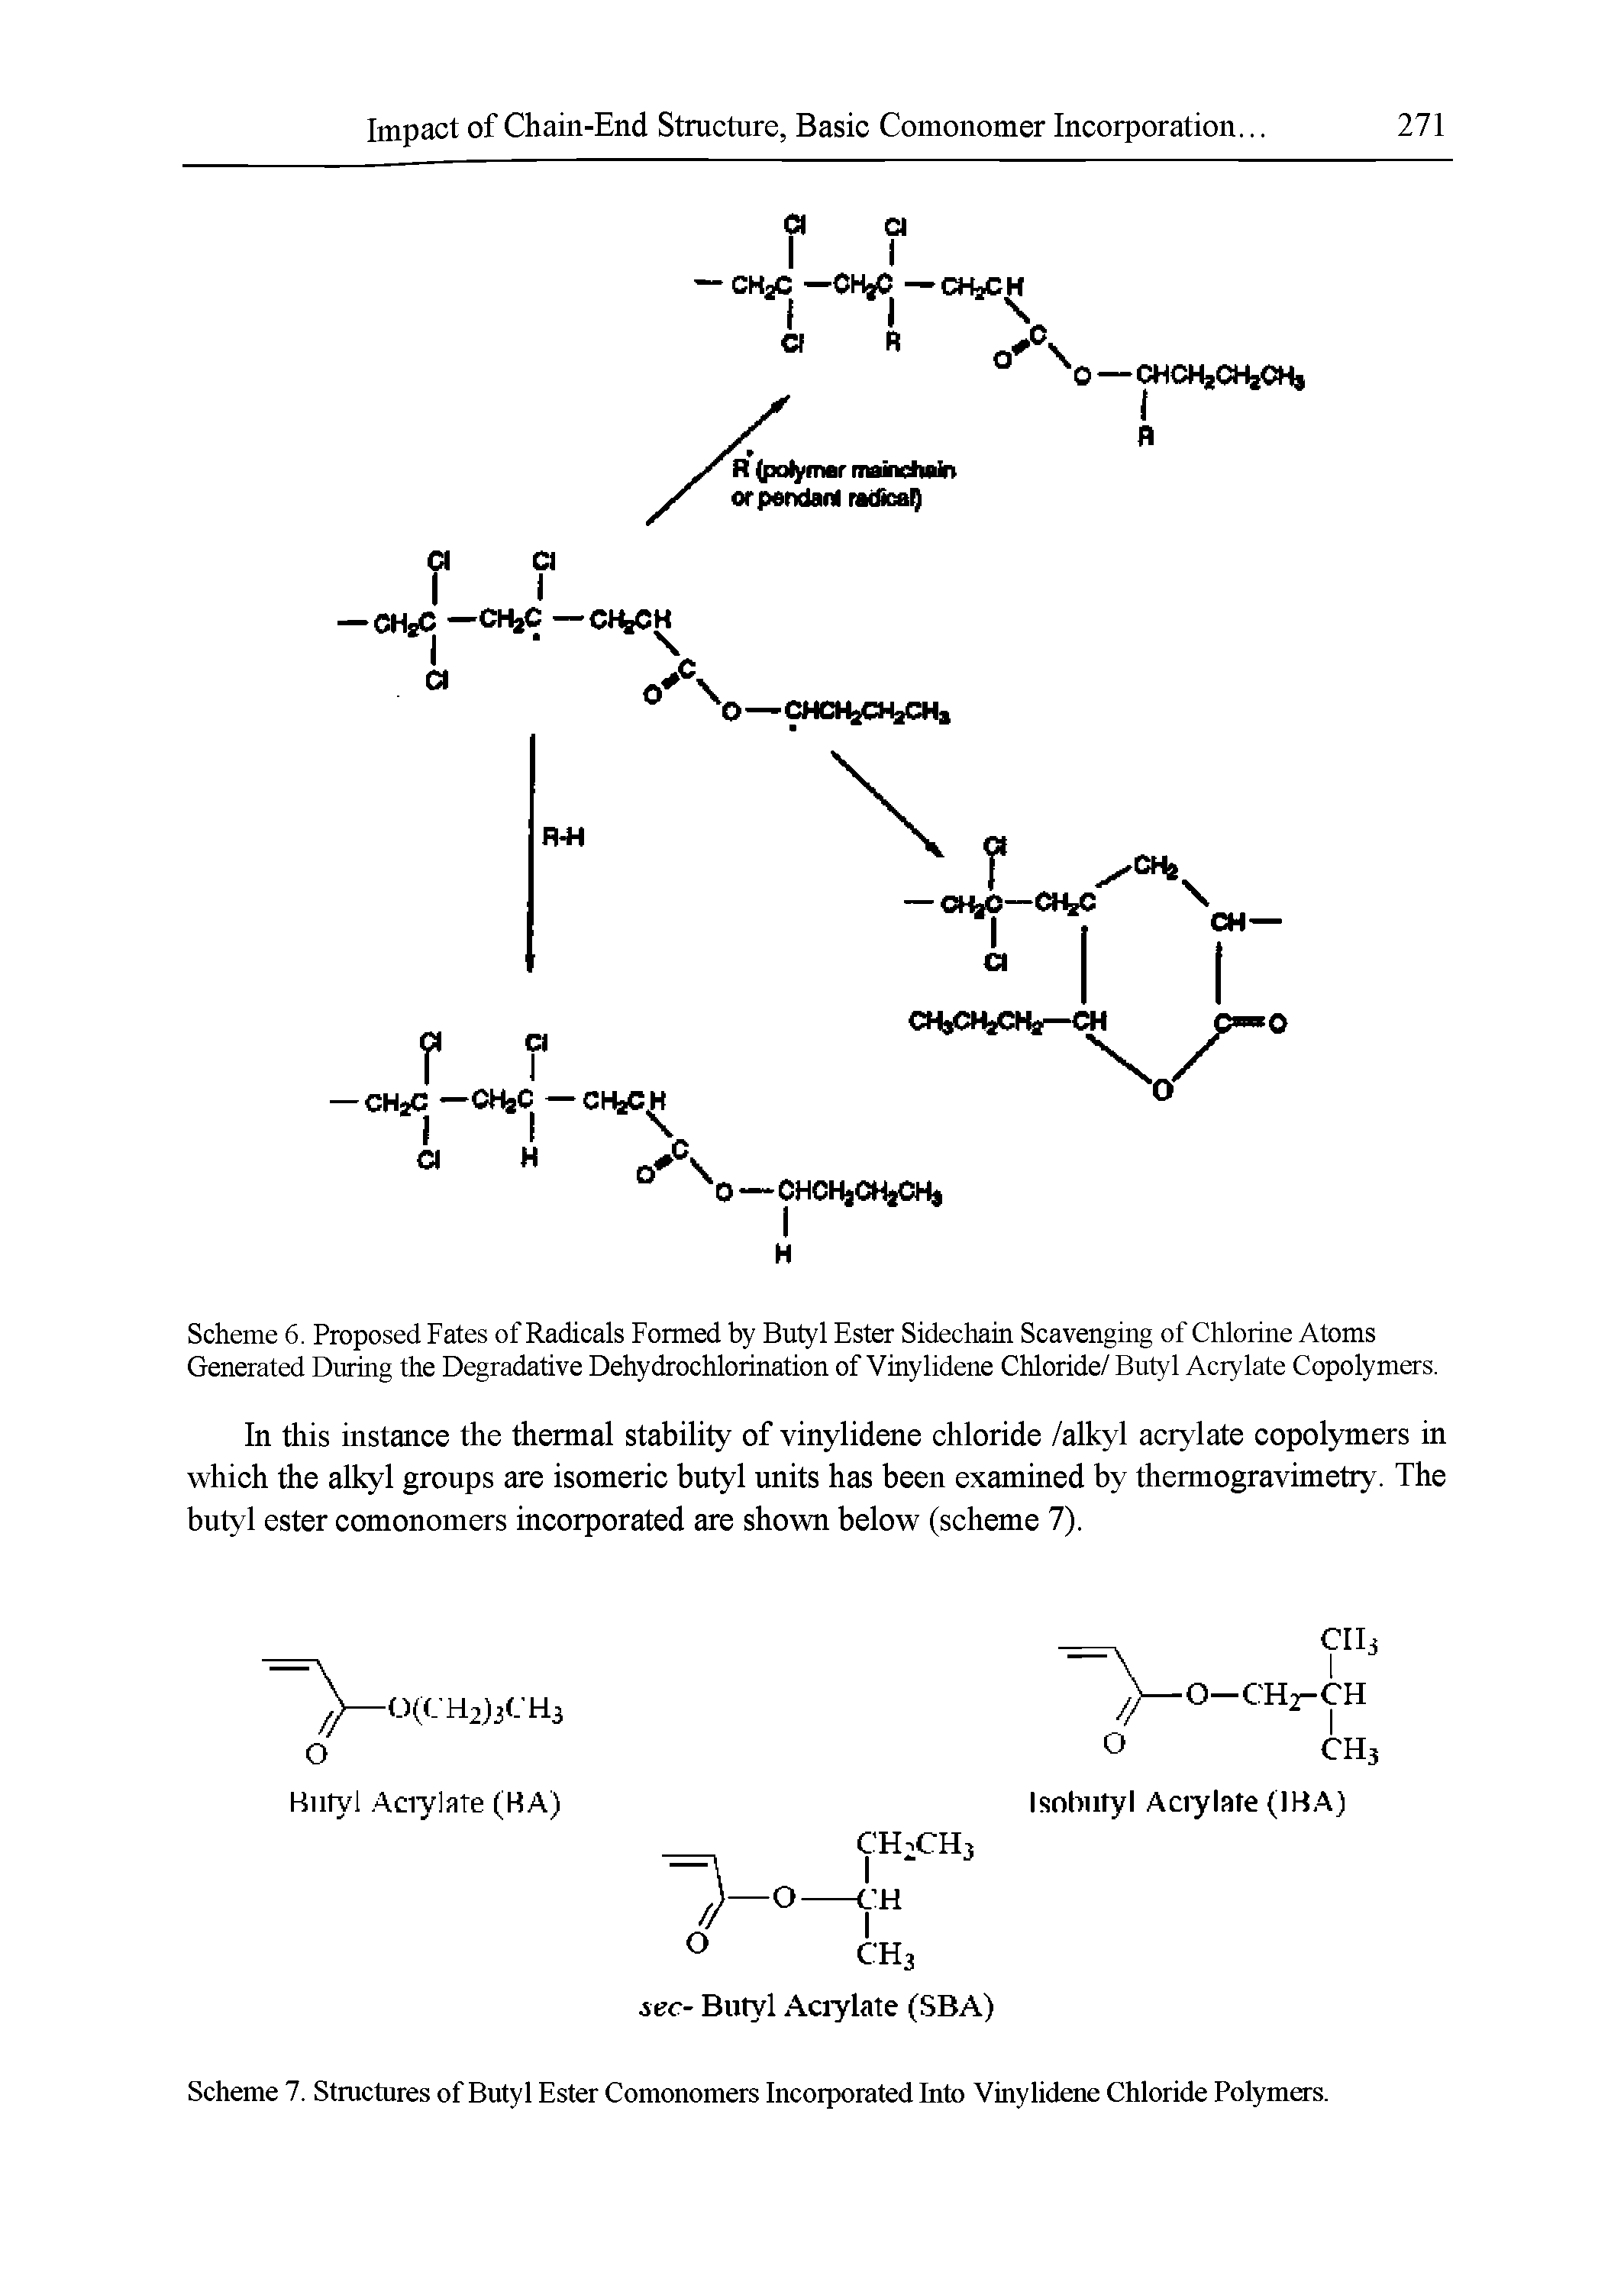 Scheme 6. Proposed Fates of Radicals Formed by Butyl Ester Sidechain Scavenging of Chlorine Atoms Generated During the Degradative Dehydrochlorination of Vinylidene Chloride/ Butyl Acrylate Copolymers.